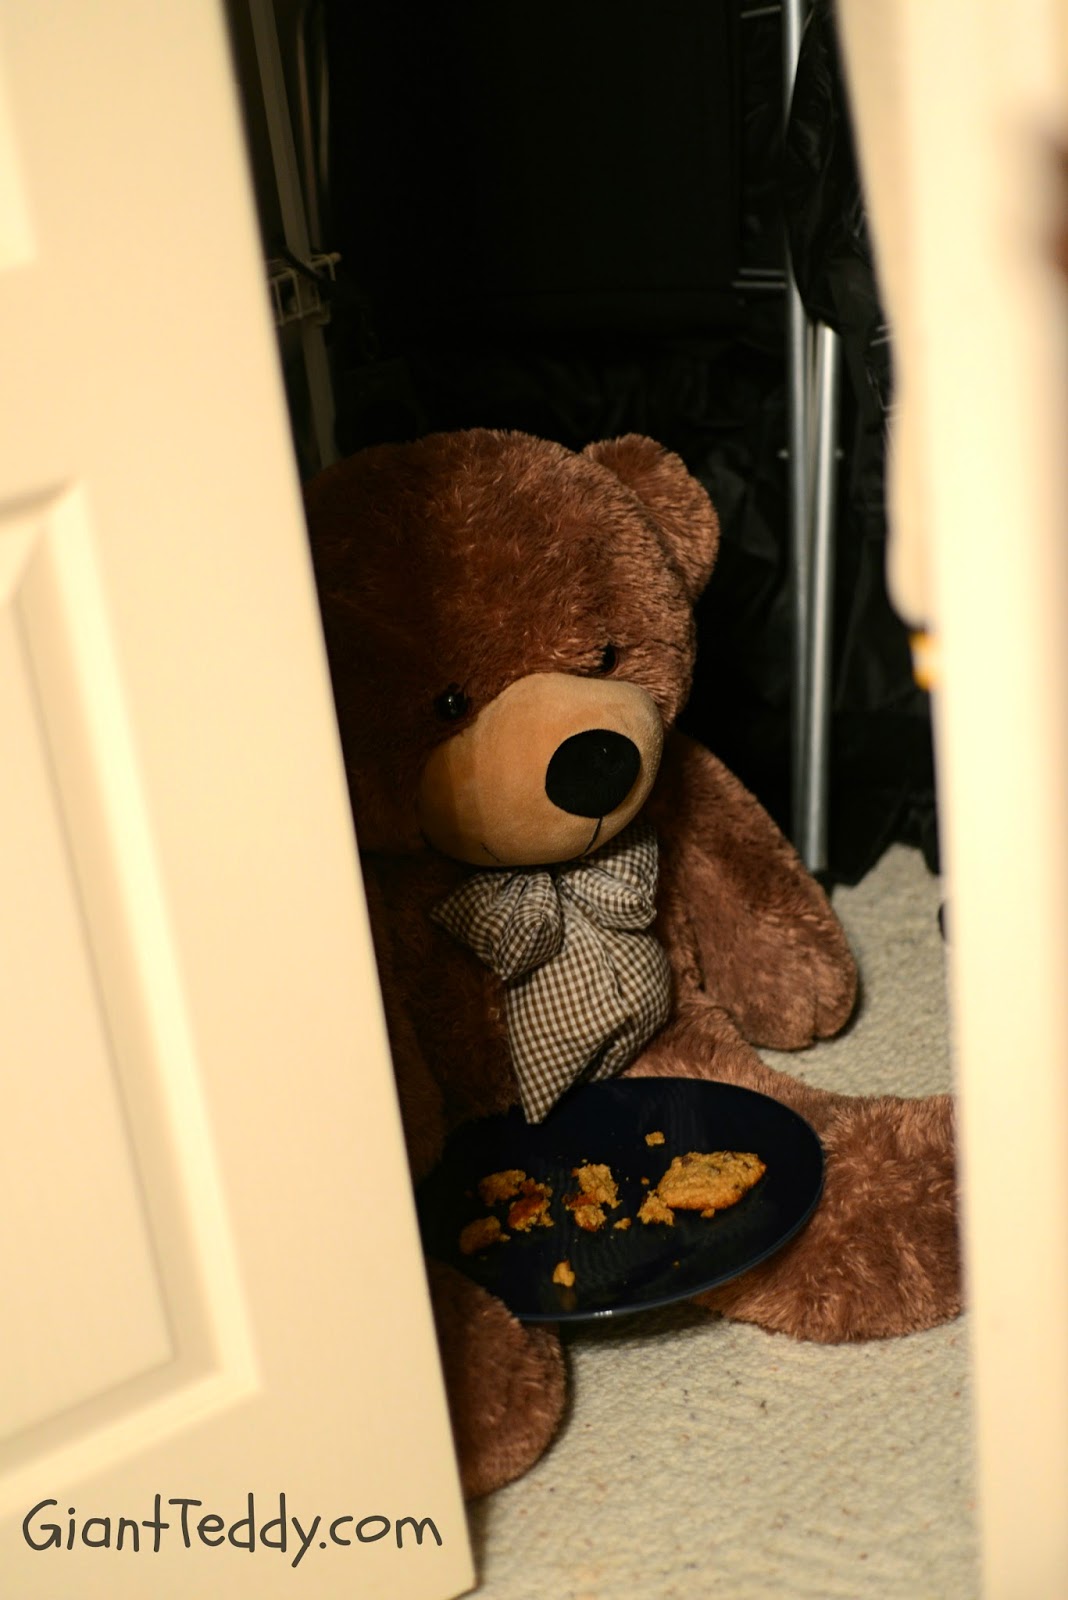 Nothing left but a big plate of crumbs. And a very stuffed big teddy bear